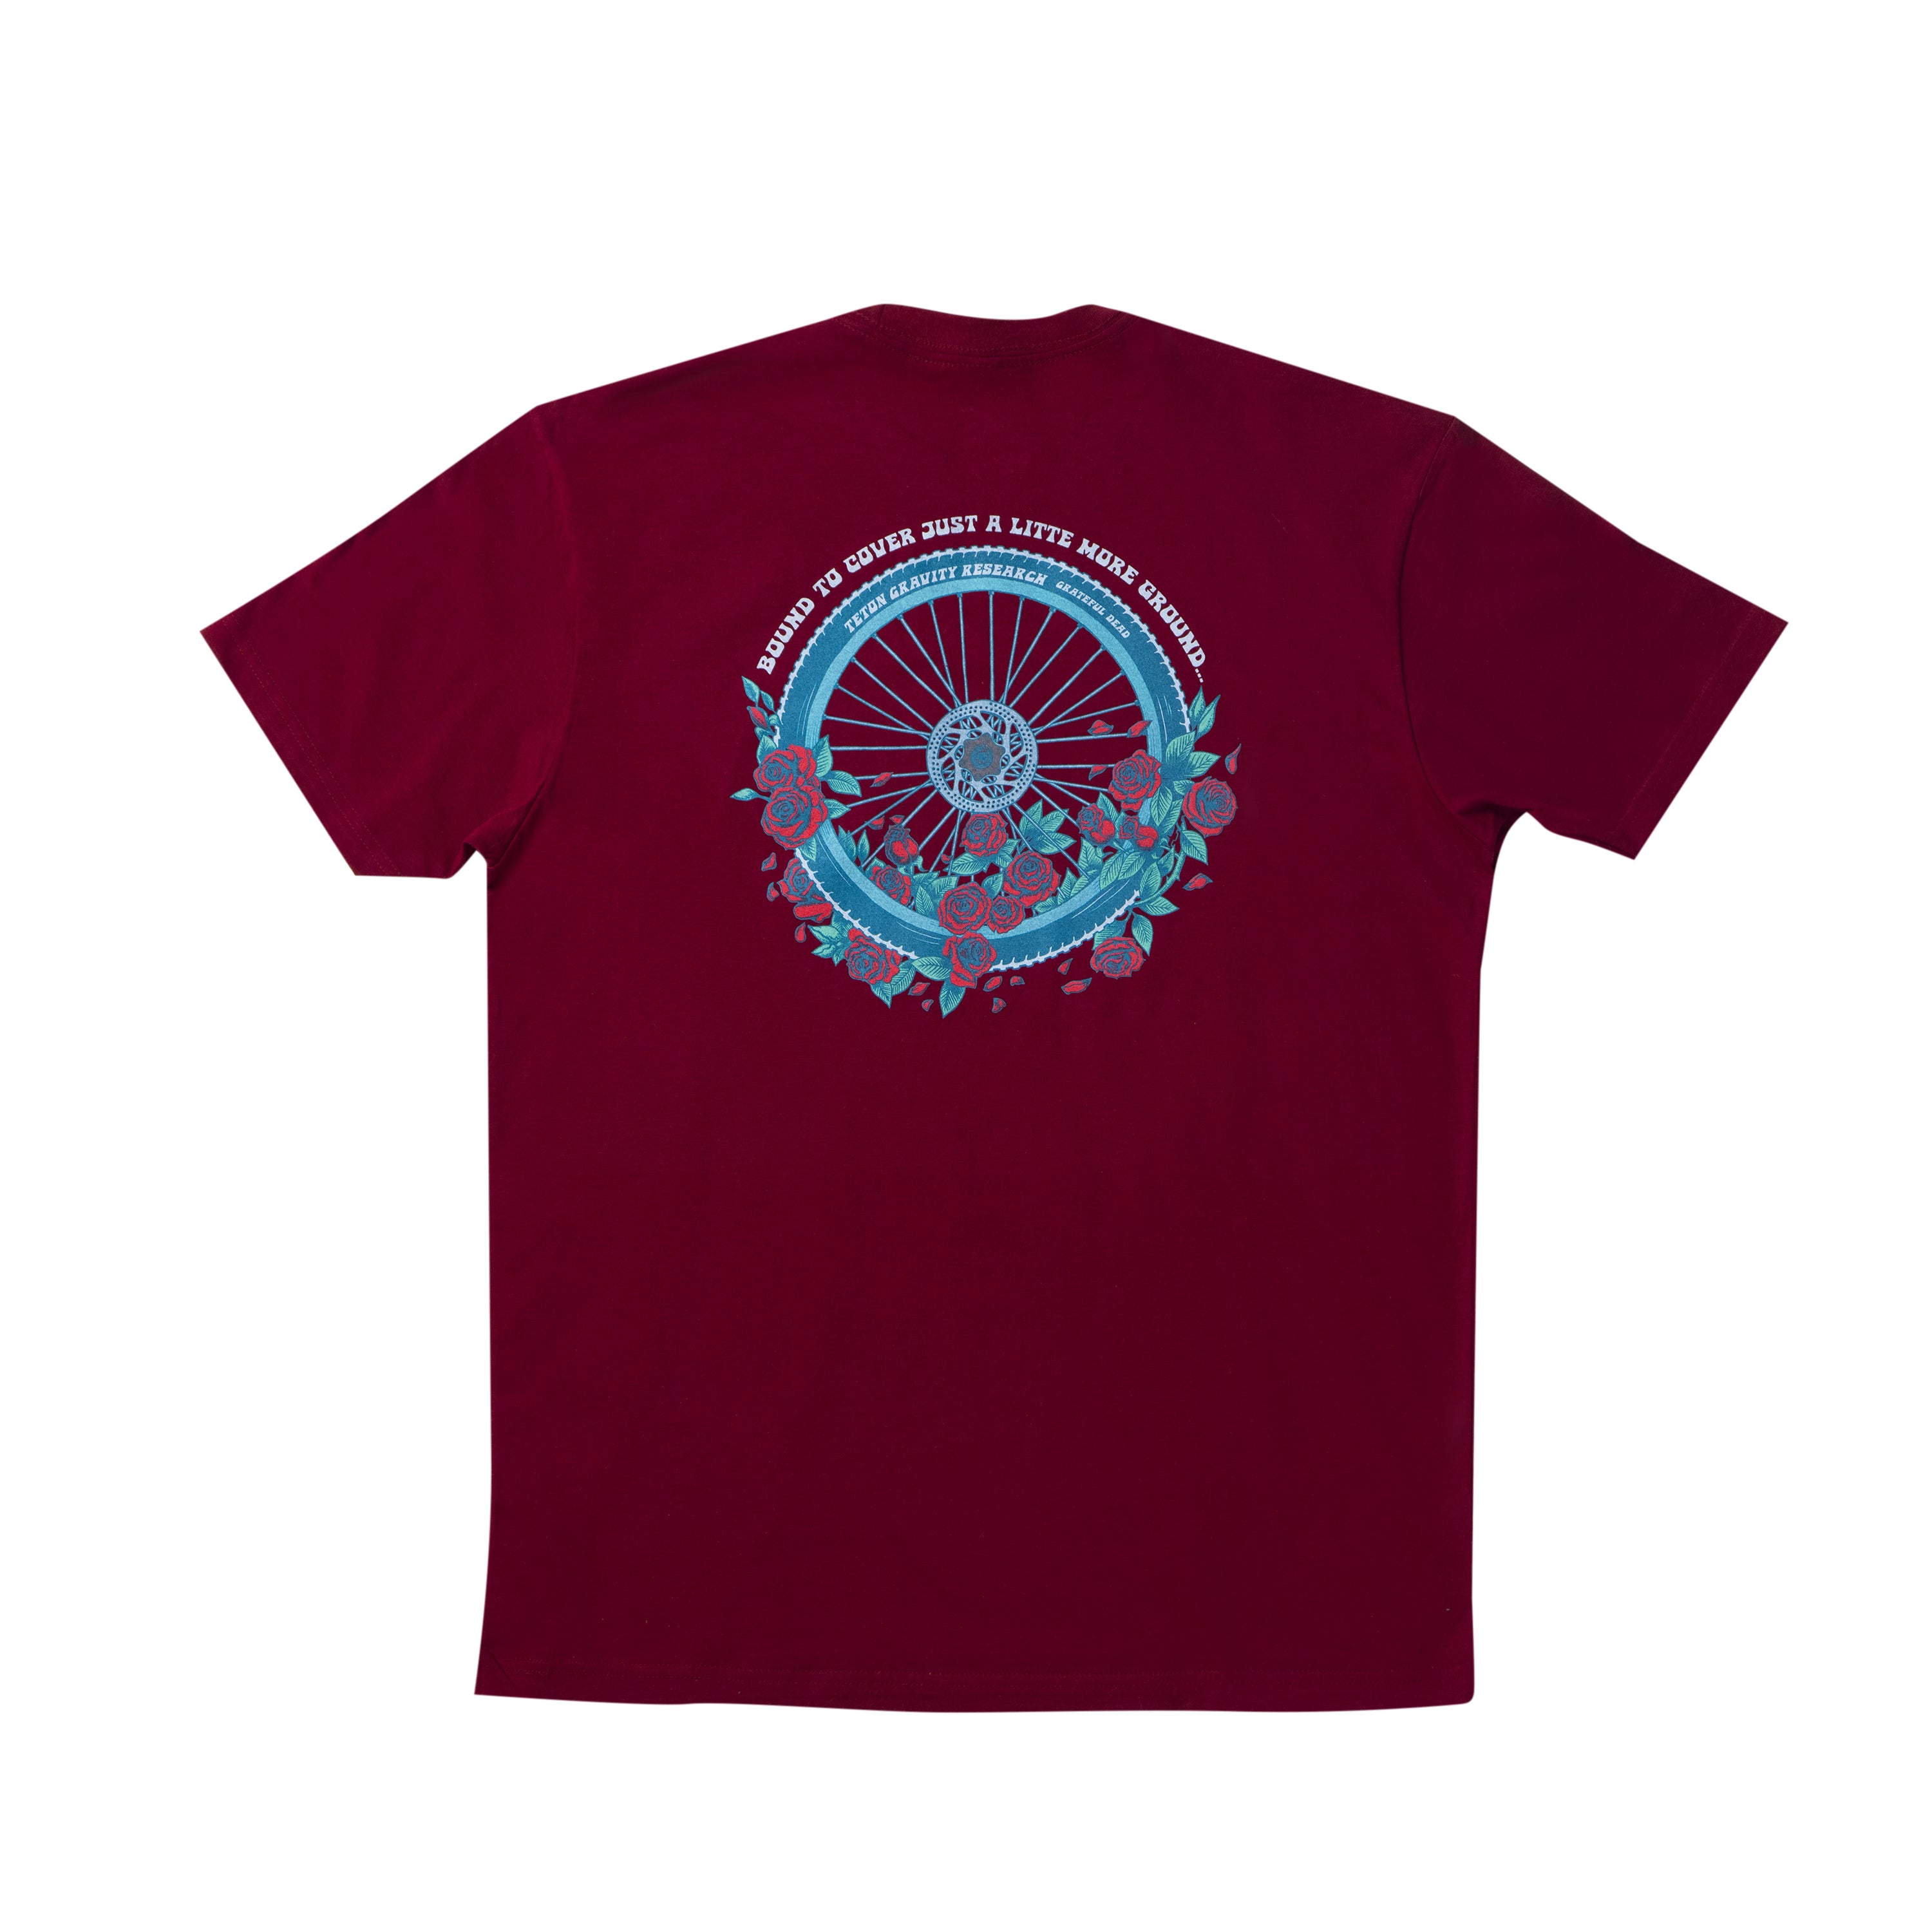 Grateful Dead x TGR “Bound to Cover Just a Little More Ground” Tee by Cetana Works